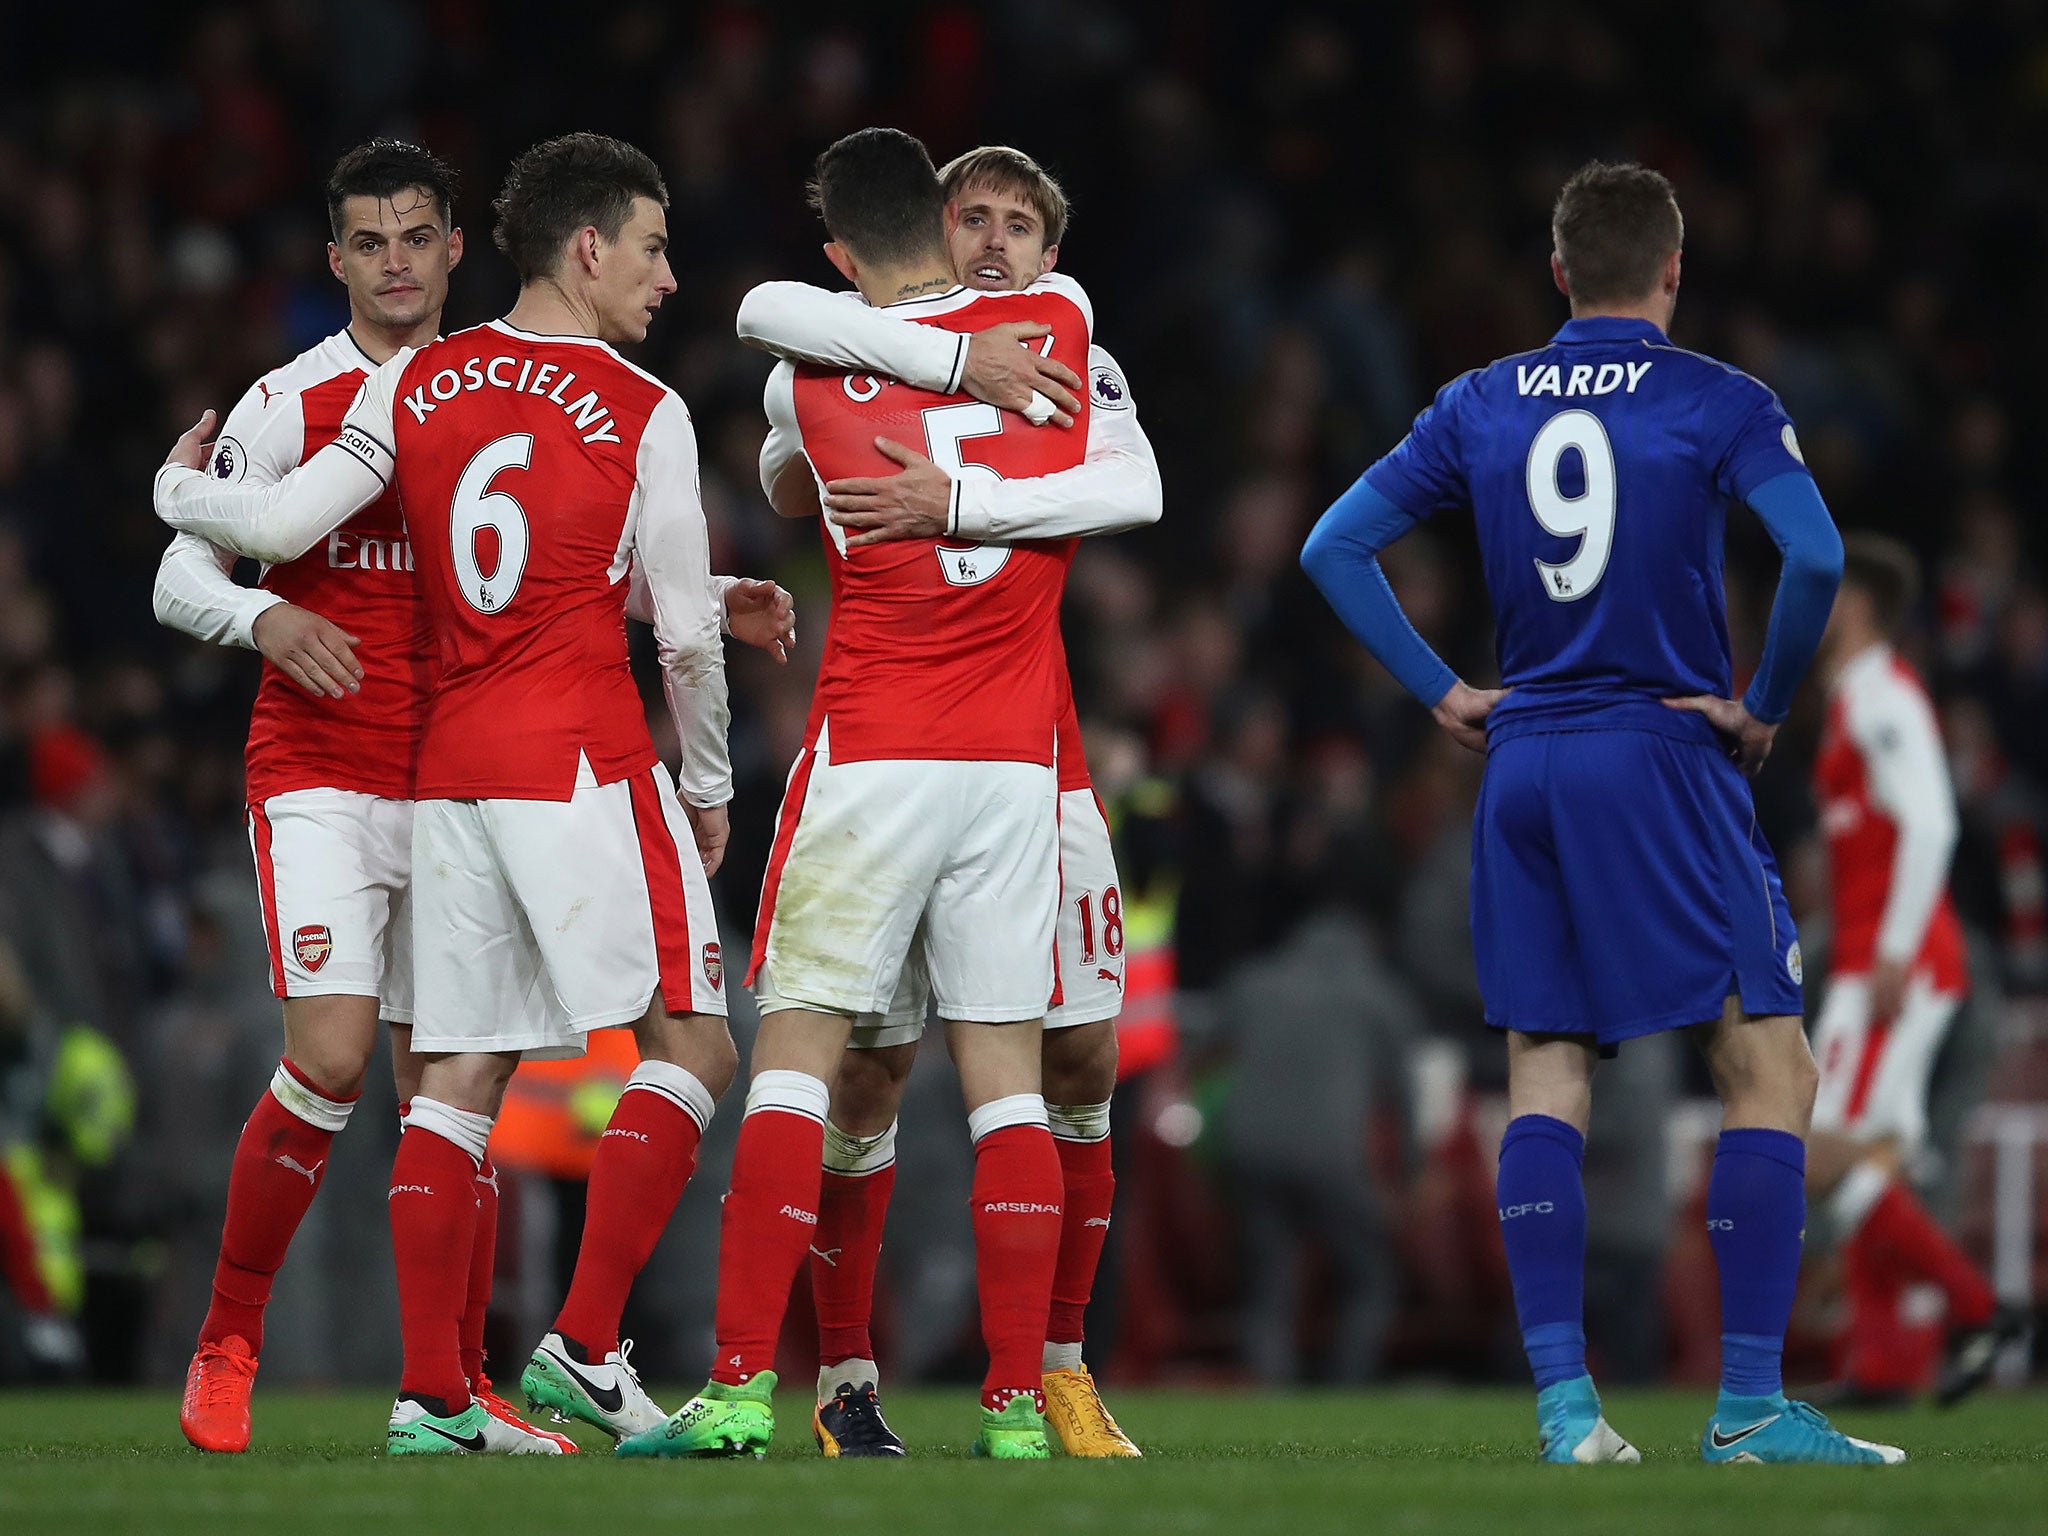 Arsenal's players celebrate after the final whistle